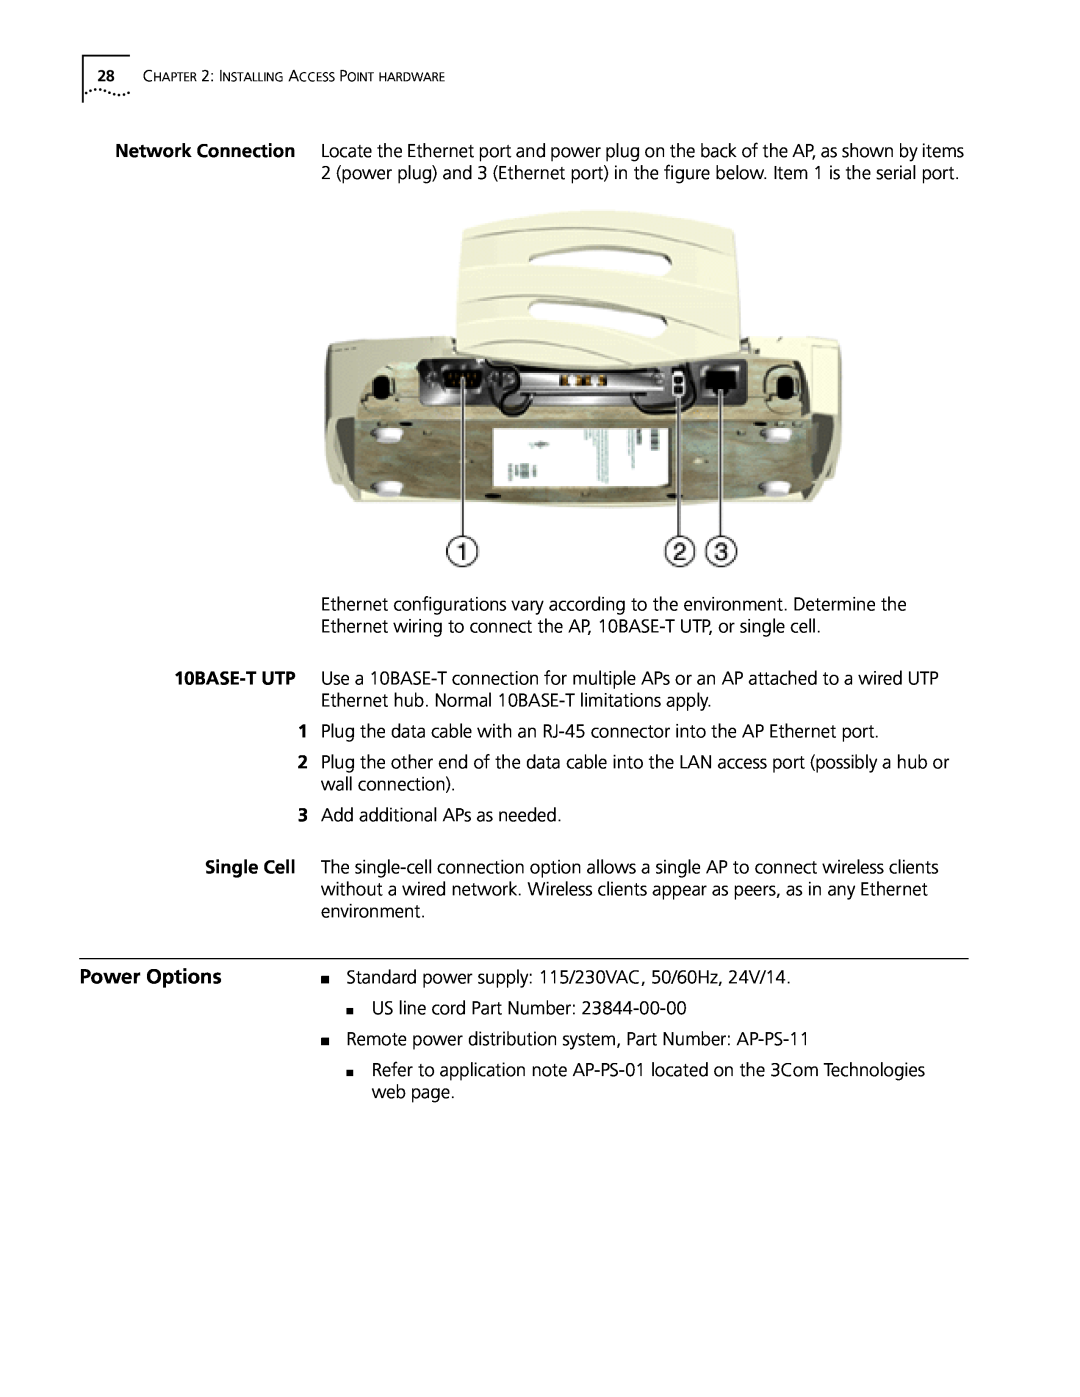 Cabletron Systems 3Com manual Power Options 